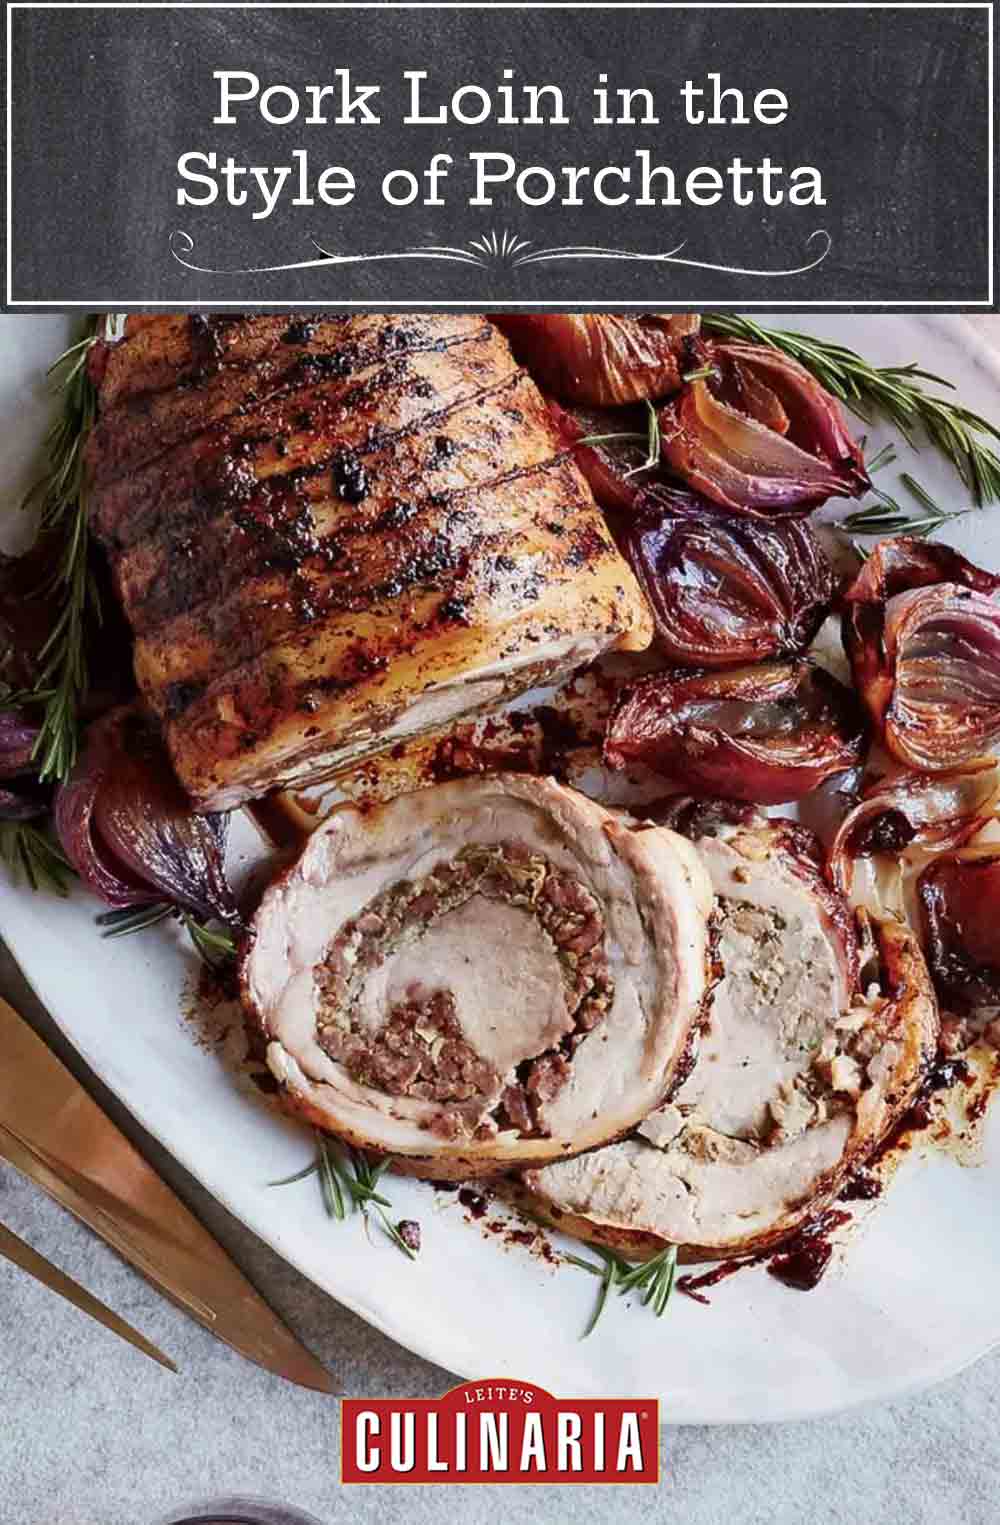 A tied pork loin in the style of Porchetta on a white platter with cooked red onions and rosemary.